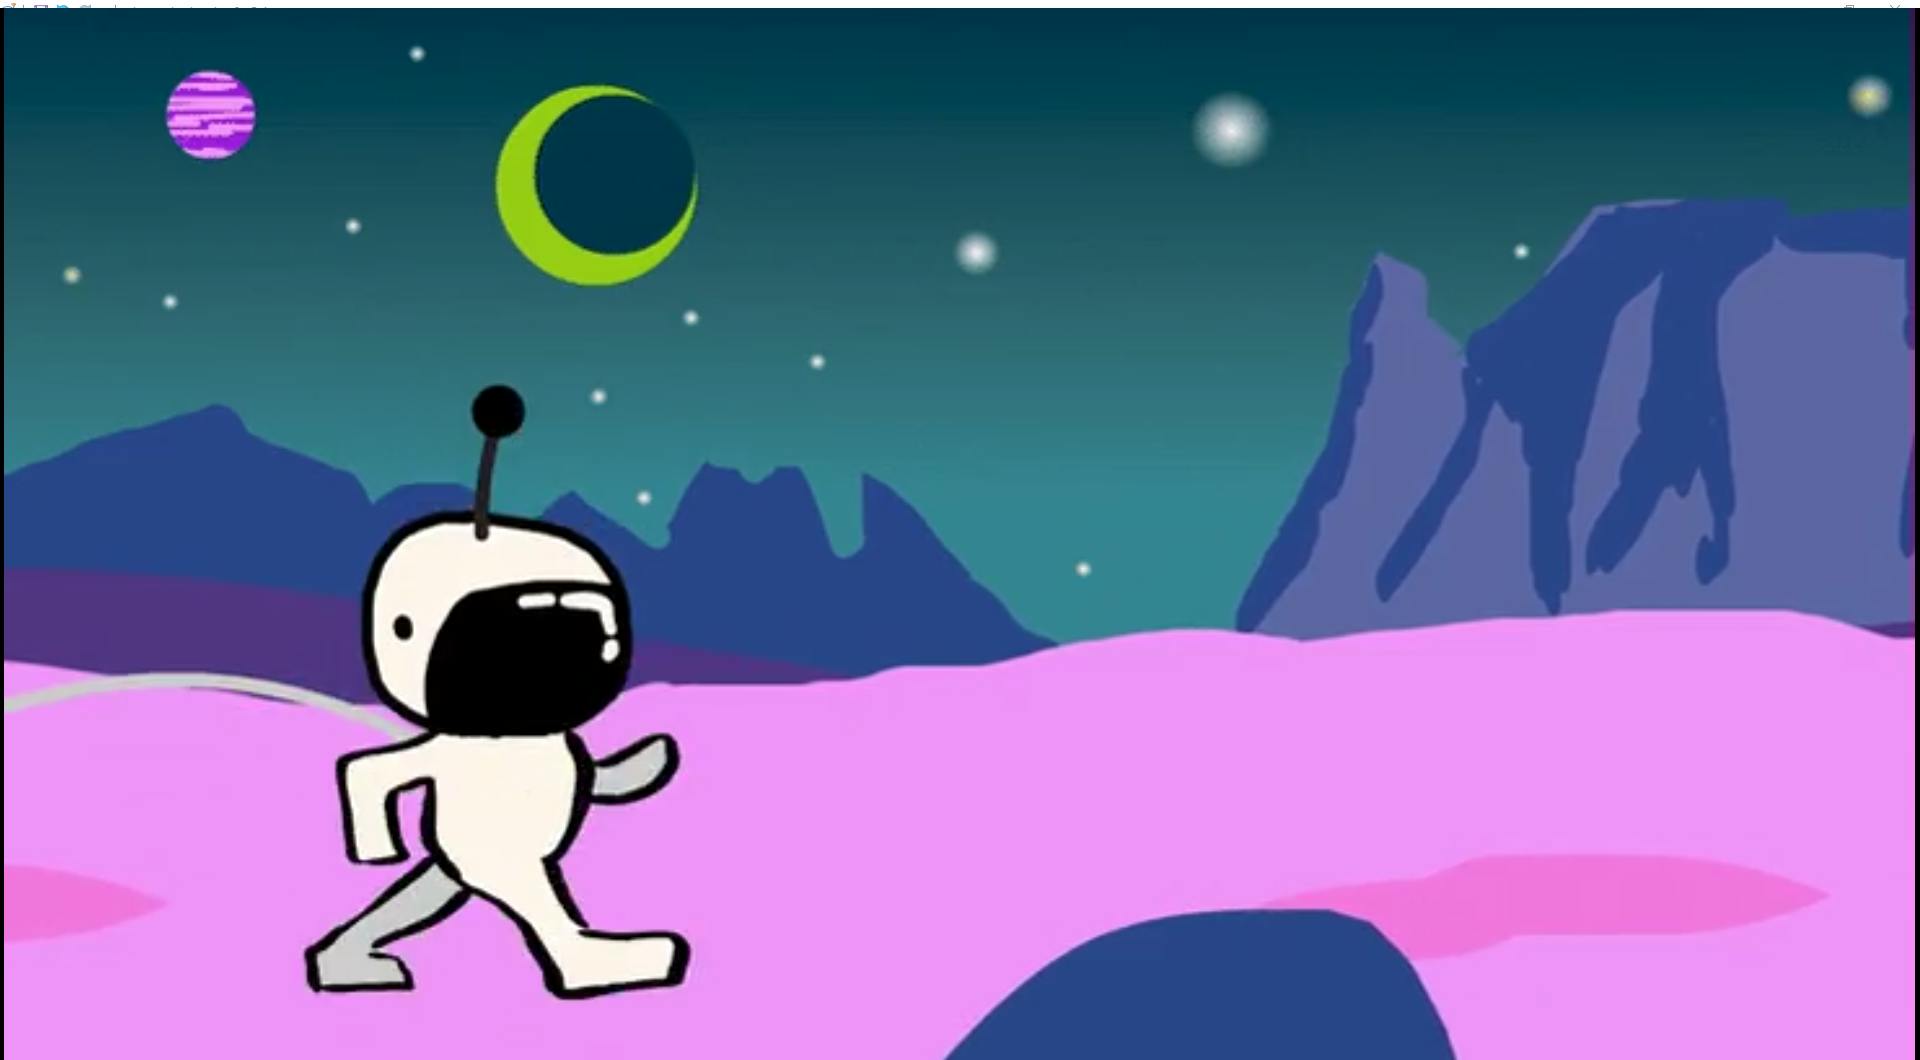 Drawing of a spaceman walking on an alien planet. The ground is pink, and the background has tall mountains and two moons